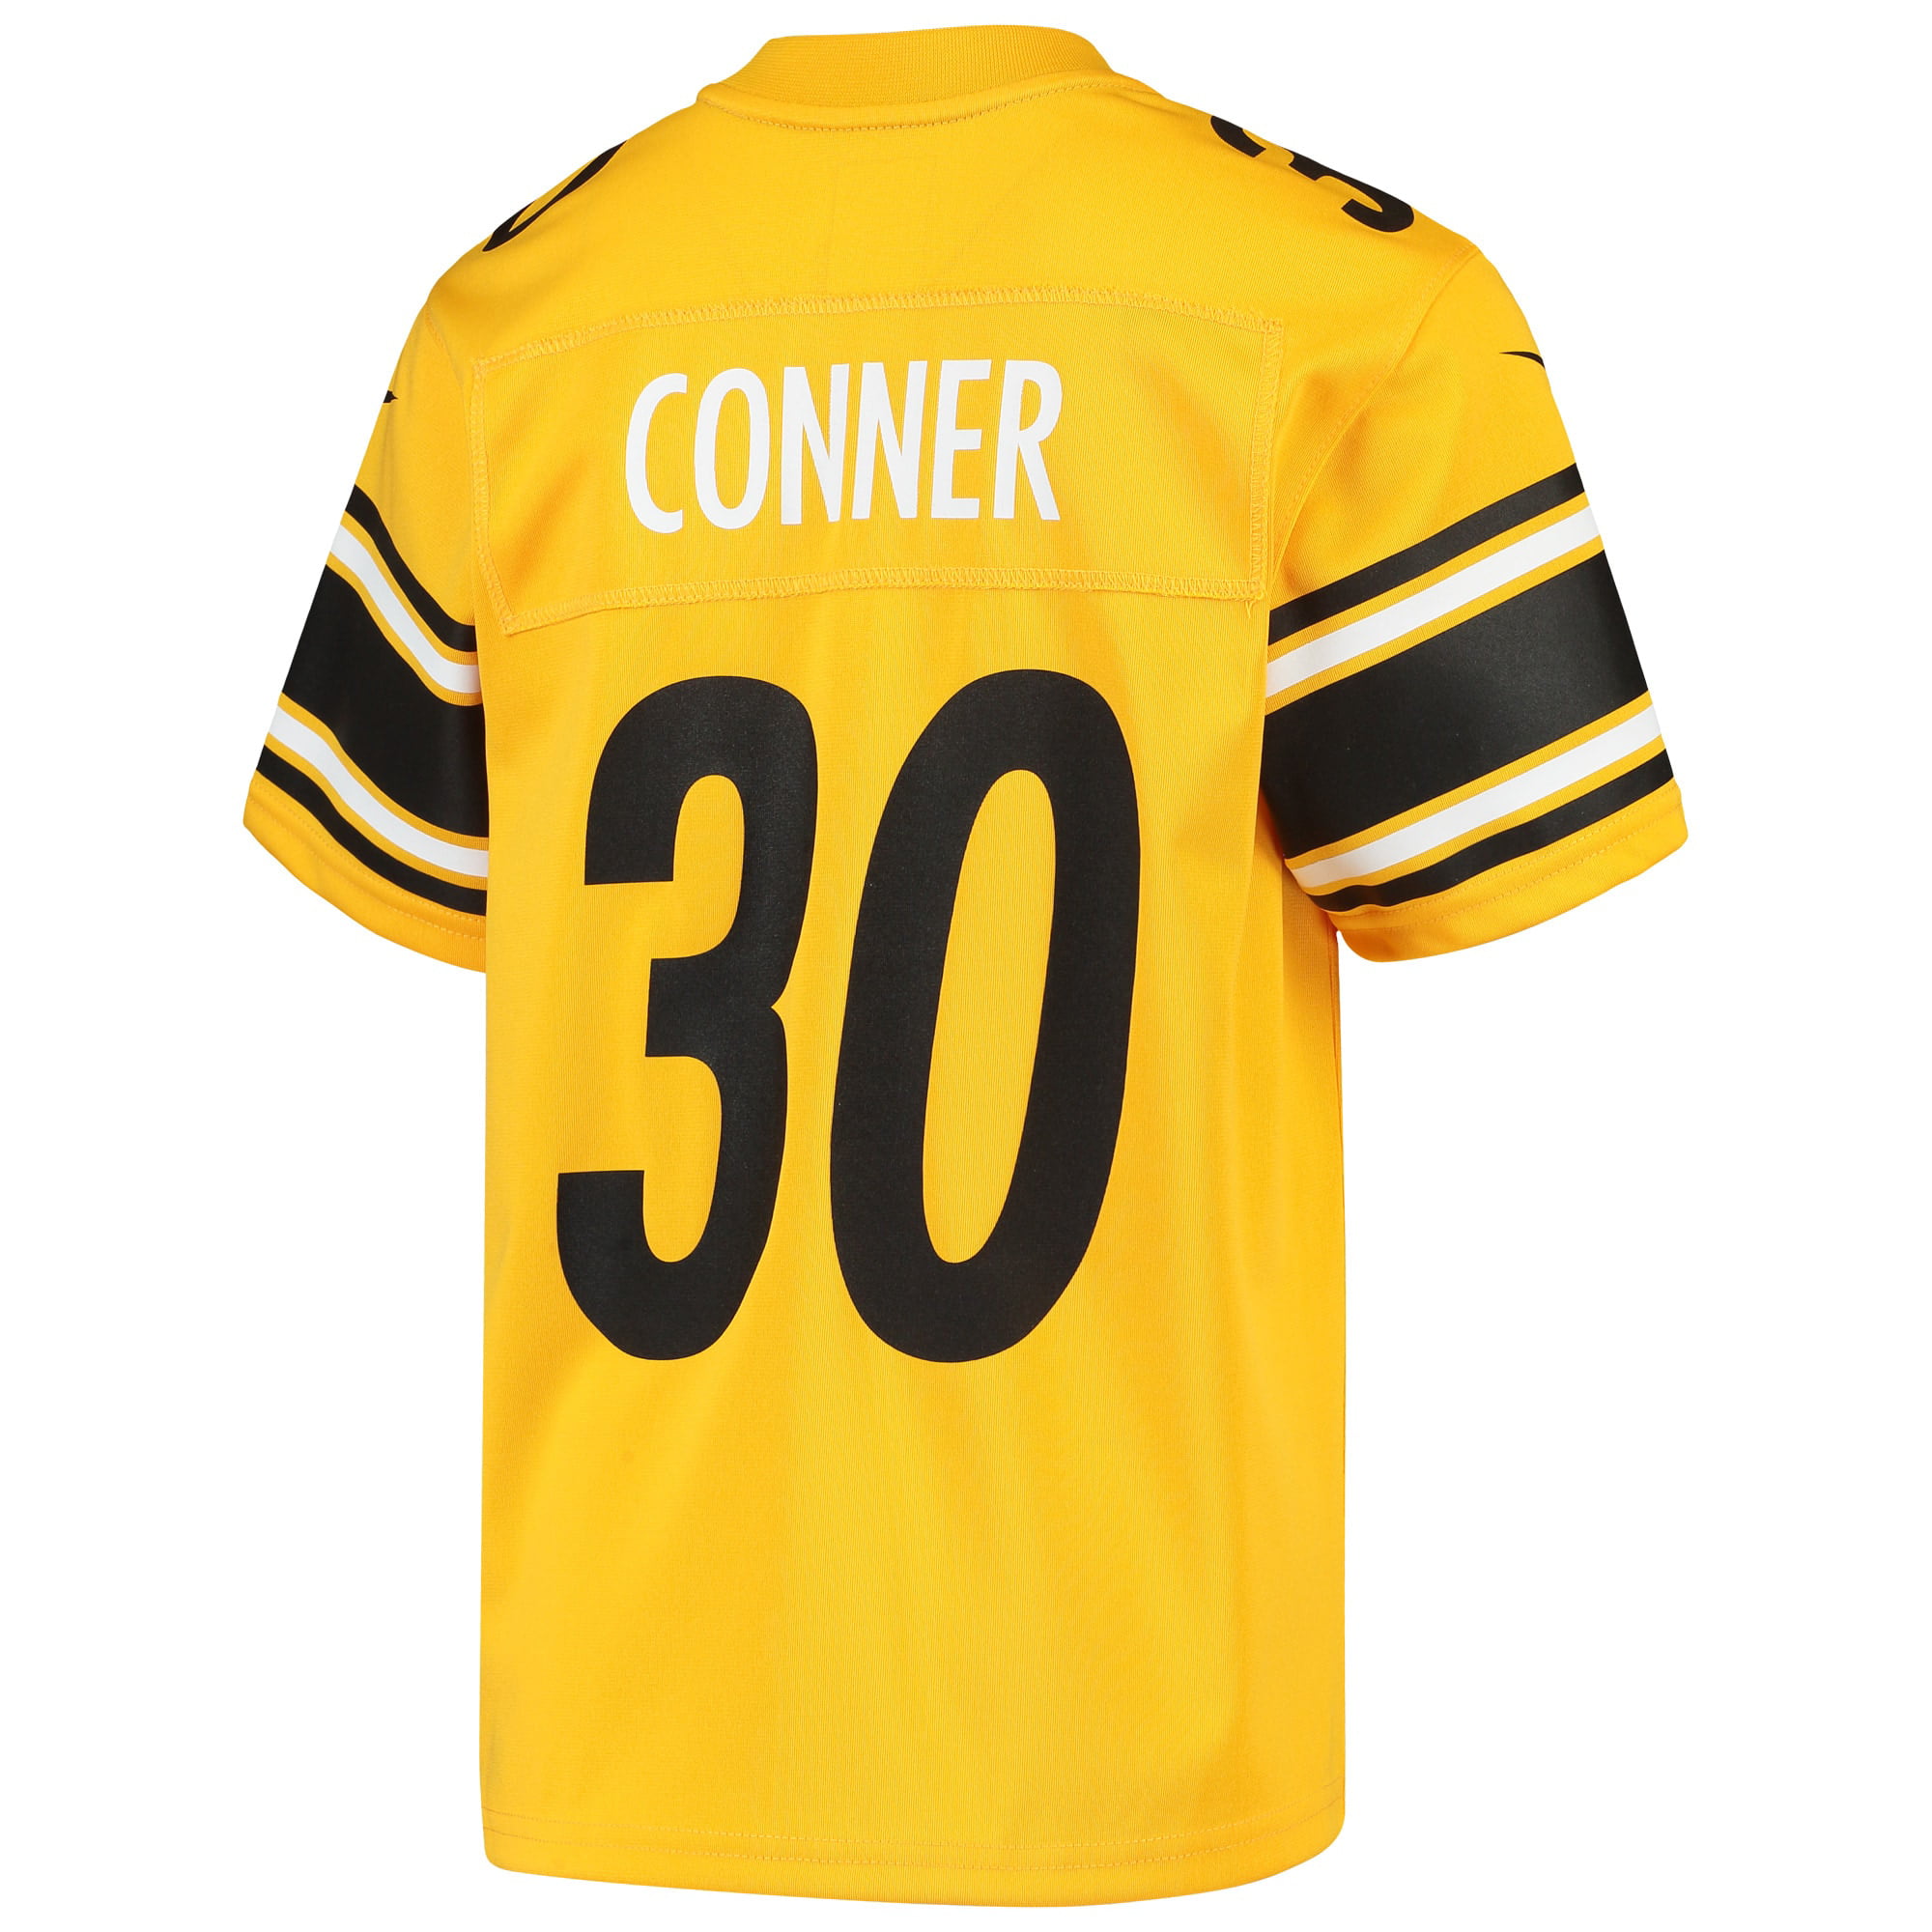 inverted steelers jersey